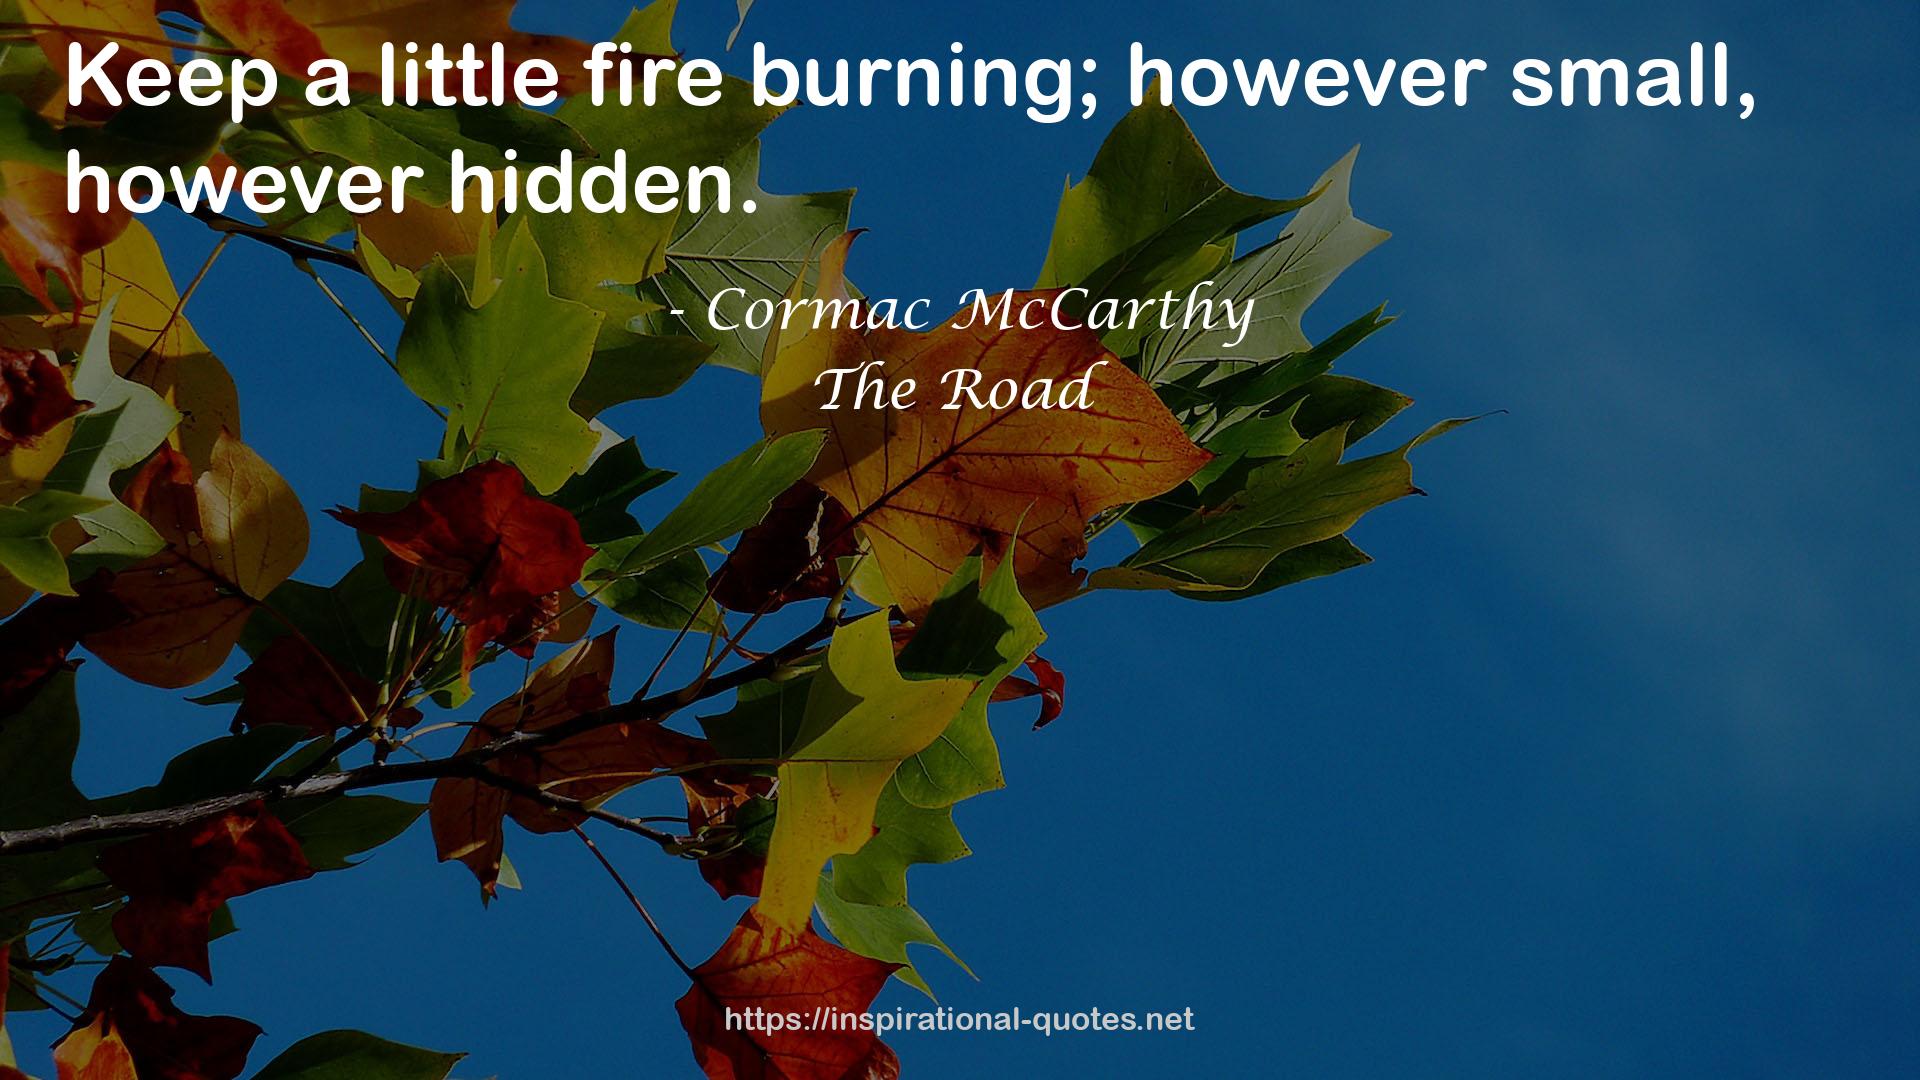 Cormac McCarthy QUOTES